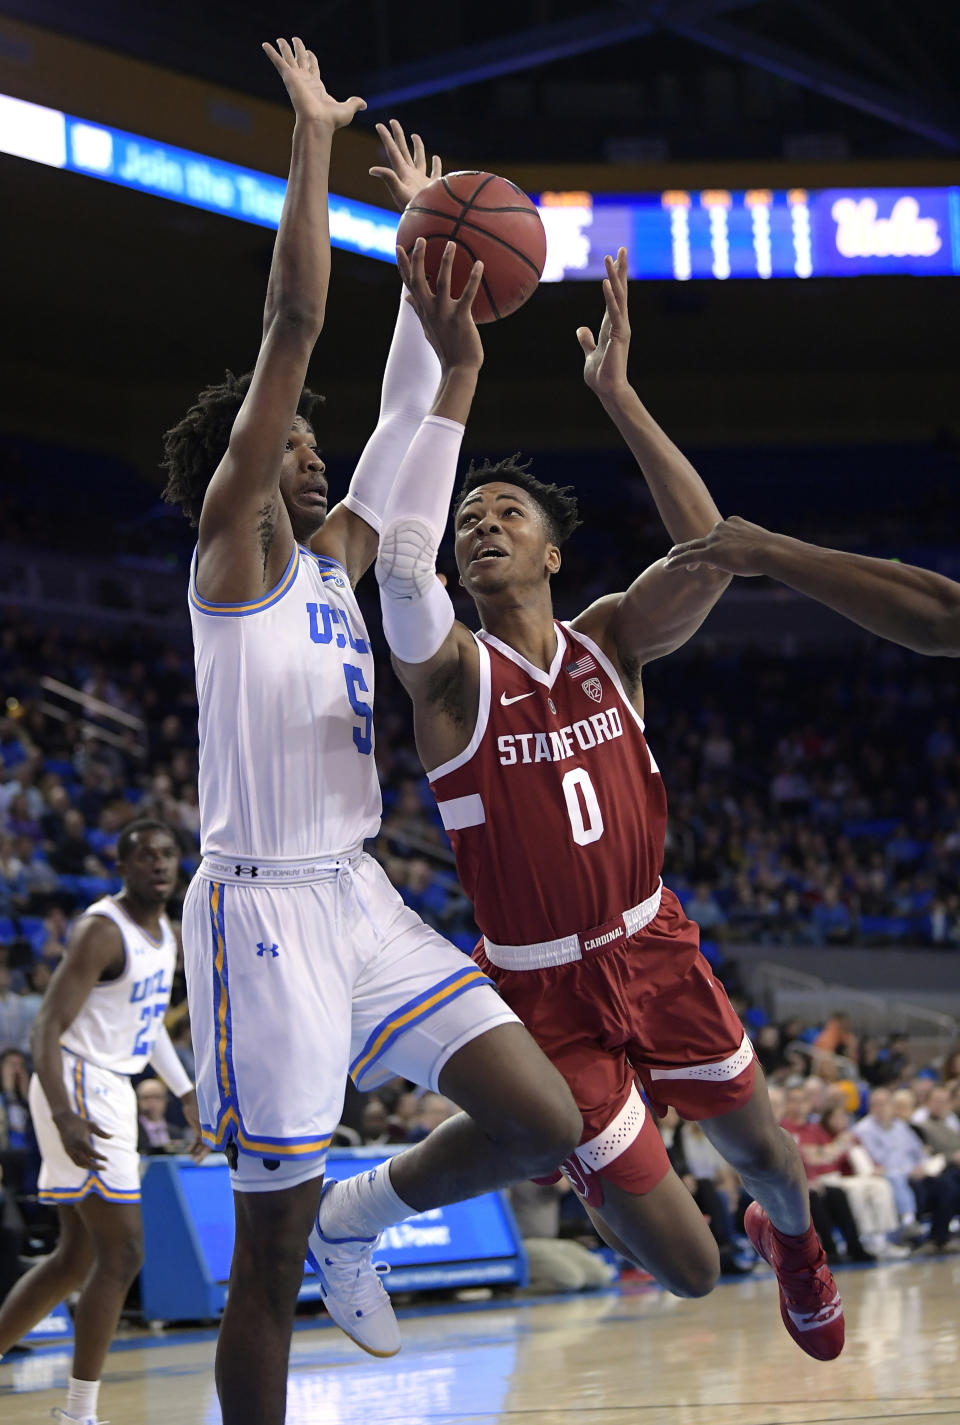 FILE - In this Jan. 3, 2019, file photo, Stanford forward KZ Okpala, right, shoots as UCLA guard Chris Smith defends during the first half of an NCAA college basketball game, in Los Angeles. Okpala is one of the top forwards in Thursday's NBA draft. (AP Photo/Mark J. Terrill, File)